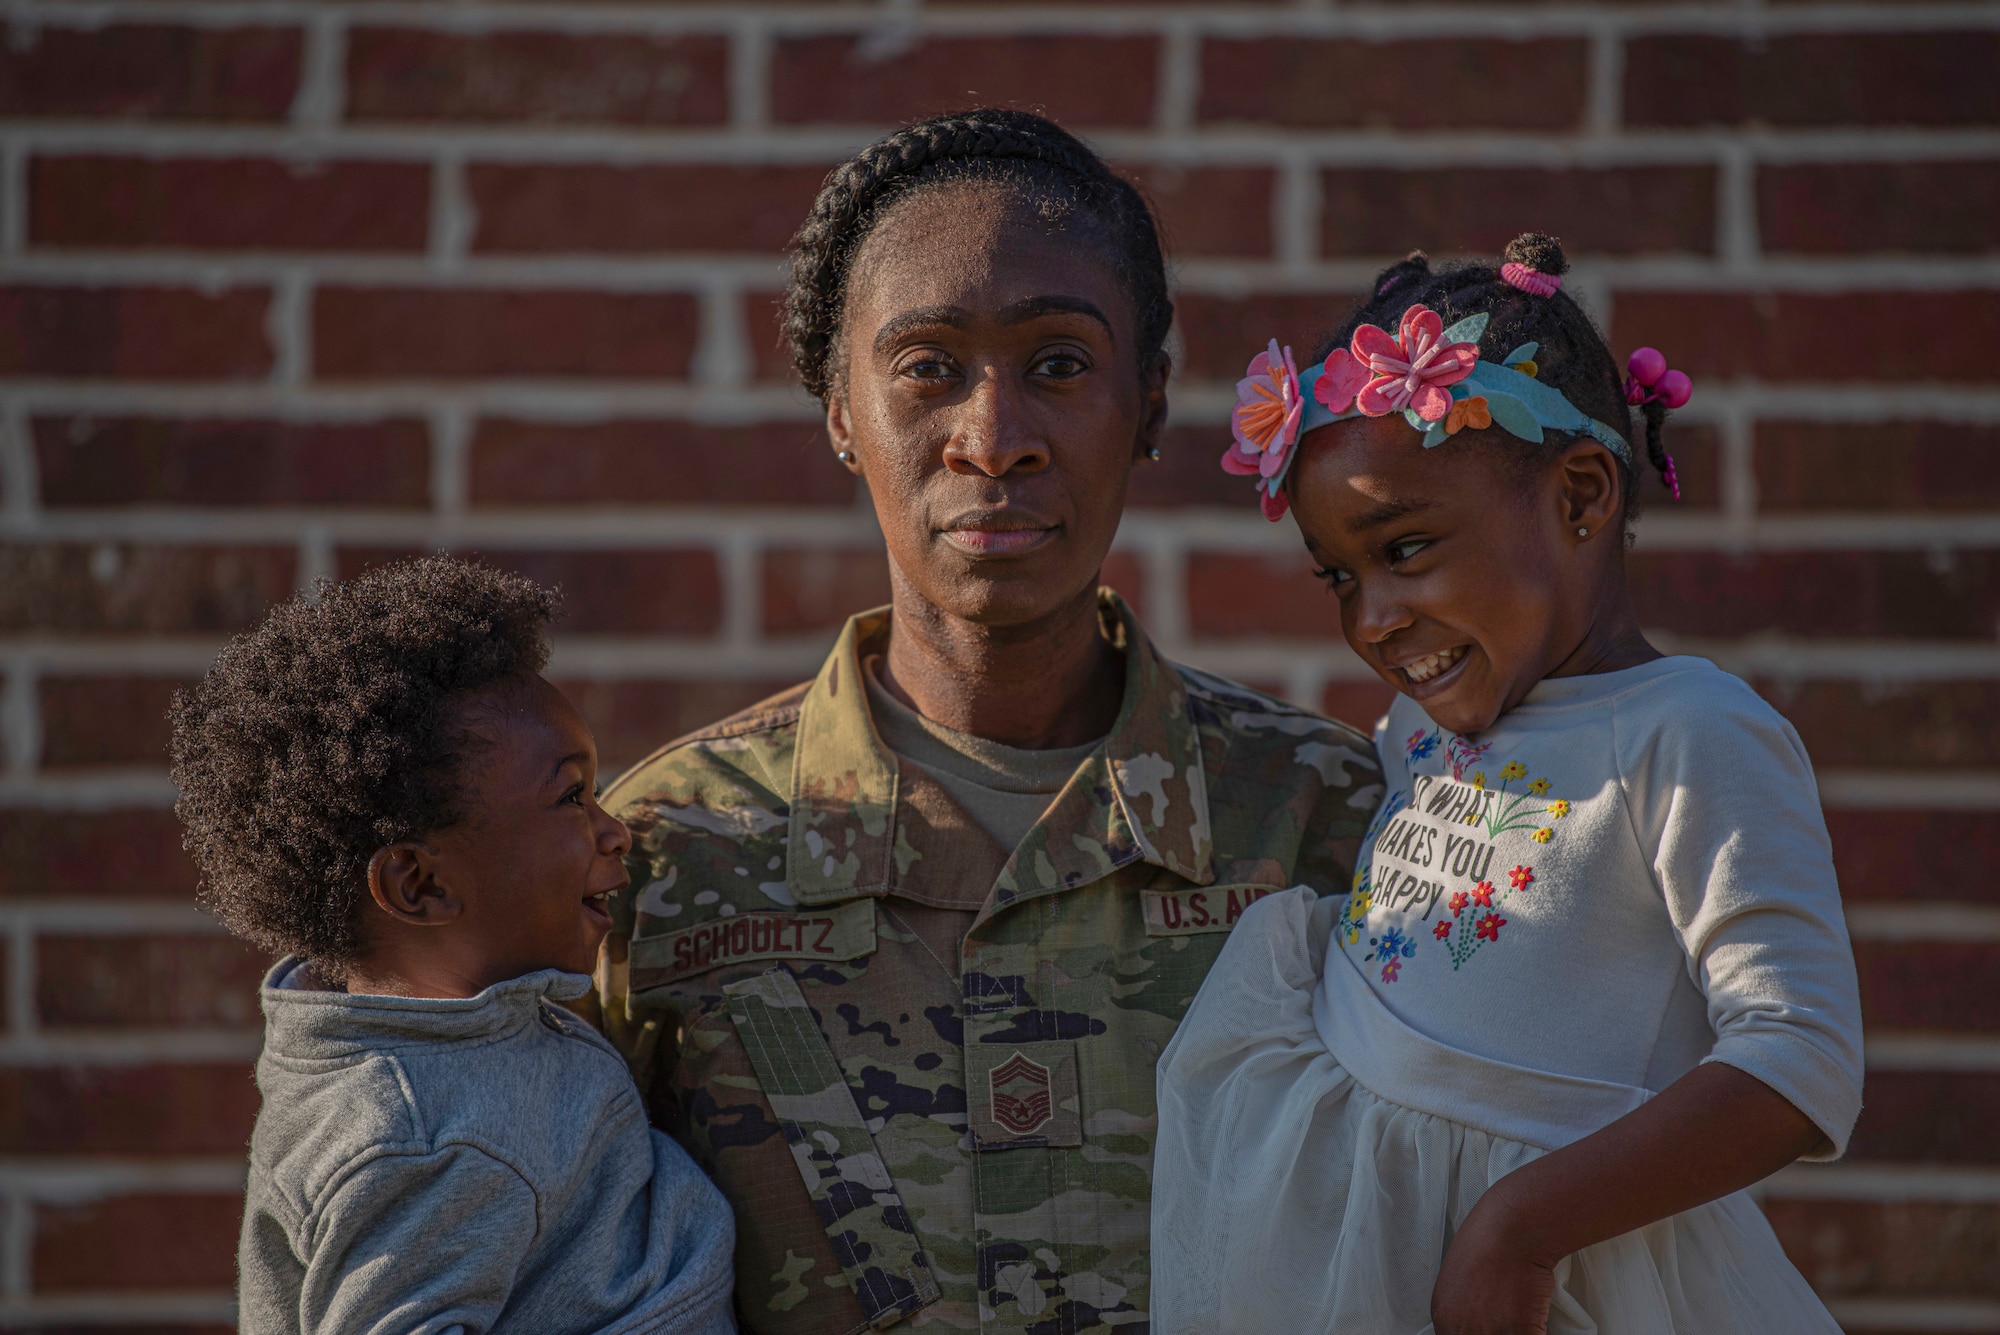 Chief Master Sgt. Latreva Schoultz, 489th Bomb Group superintendent, holds her two youngest children in Abilene, Texas, March 20, 2020. After having three sons, Schoultz adopted her daughter in the fall 2019 after fostering her for 10 months. (U.S. Air Force photo by Airman 1st Class Colin Hollowell)